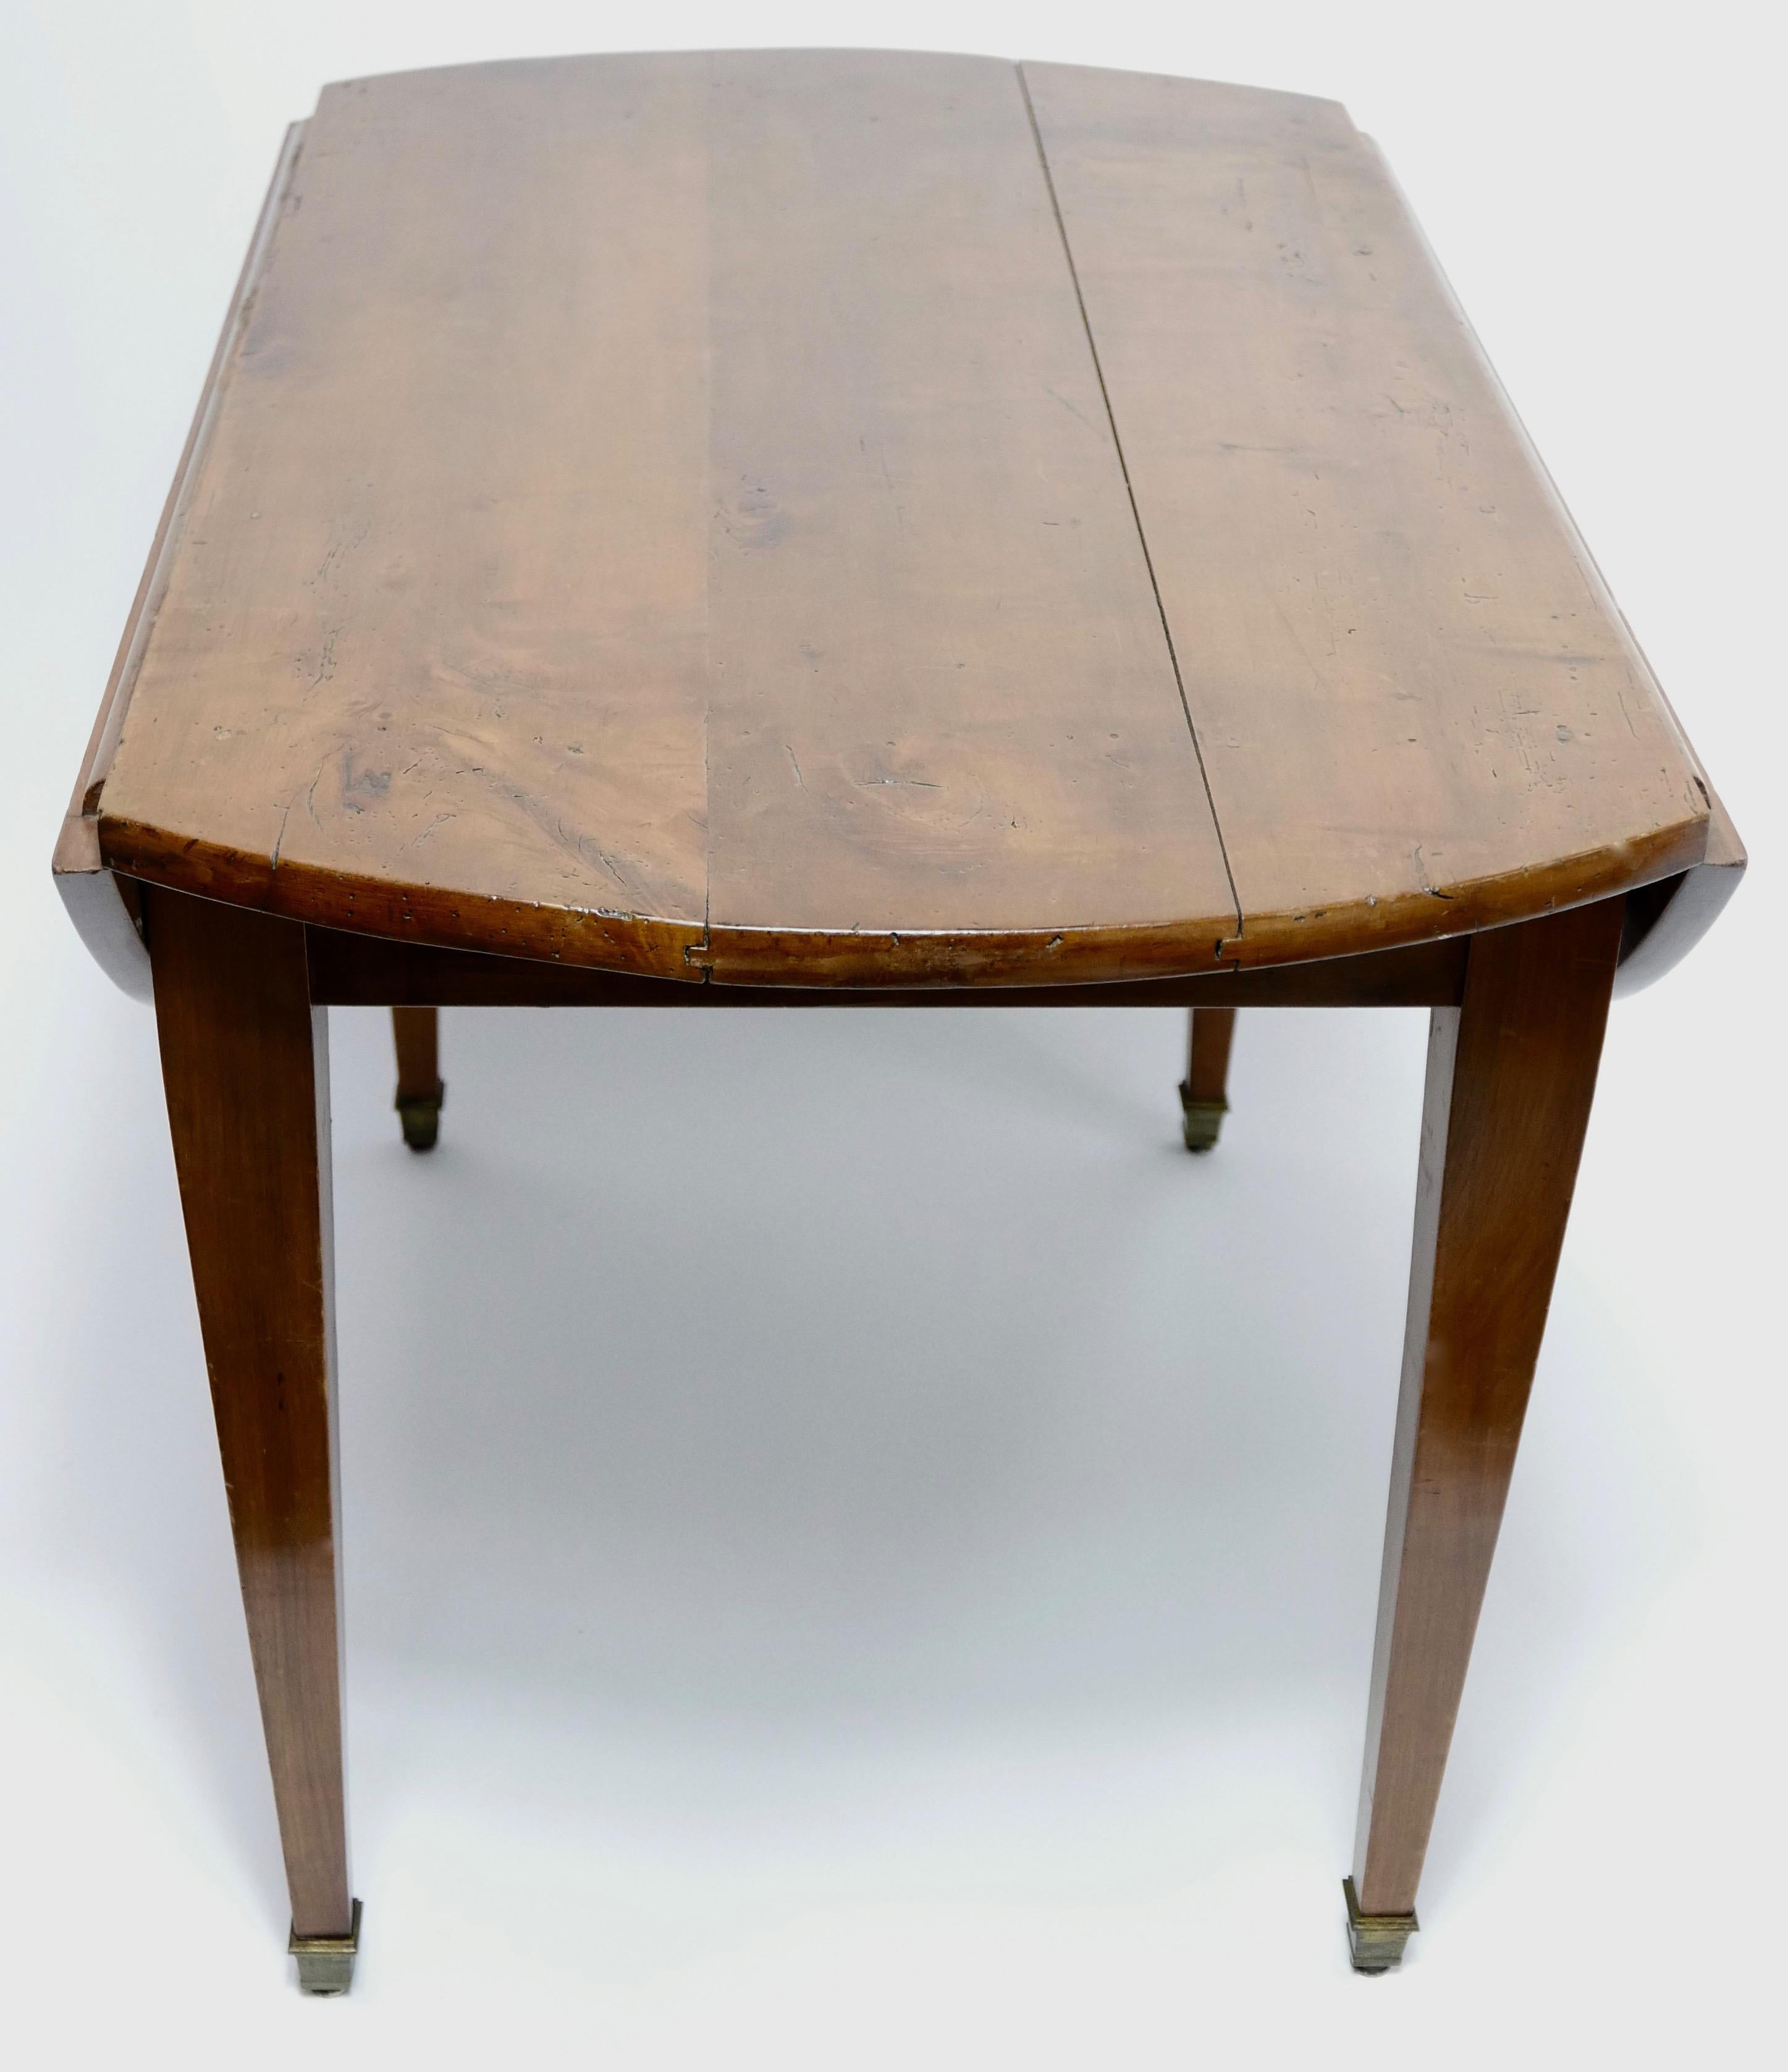 French Cherry Wood Drop-Leaf Table, Early 19th Century 2